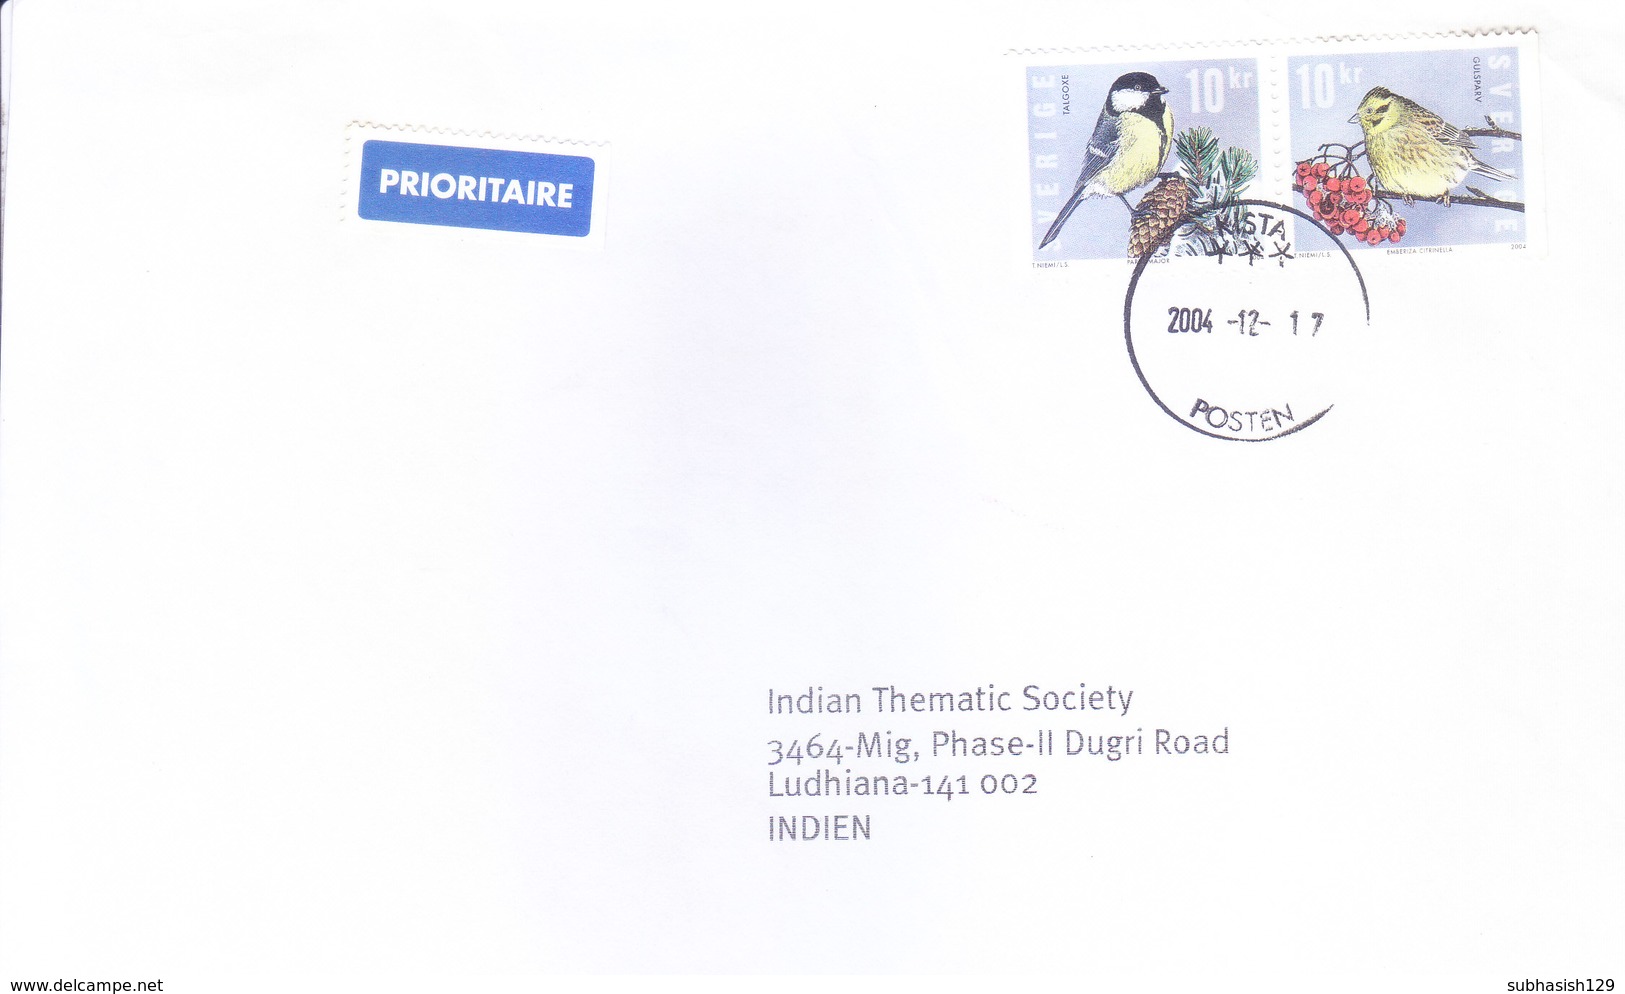 SWEDEN 2004 COMMERCIAL COVER POSTED FROM KISTA FOR INDIA - 2V STRIP OF BIRD STAMP - Covers & Documents